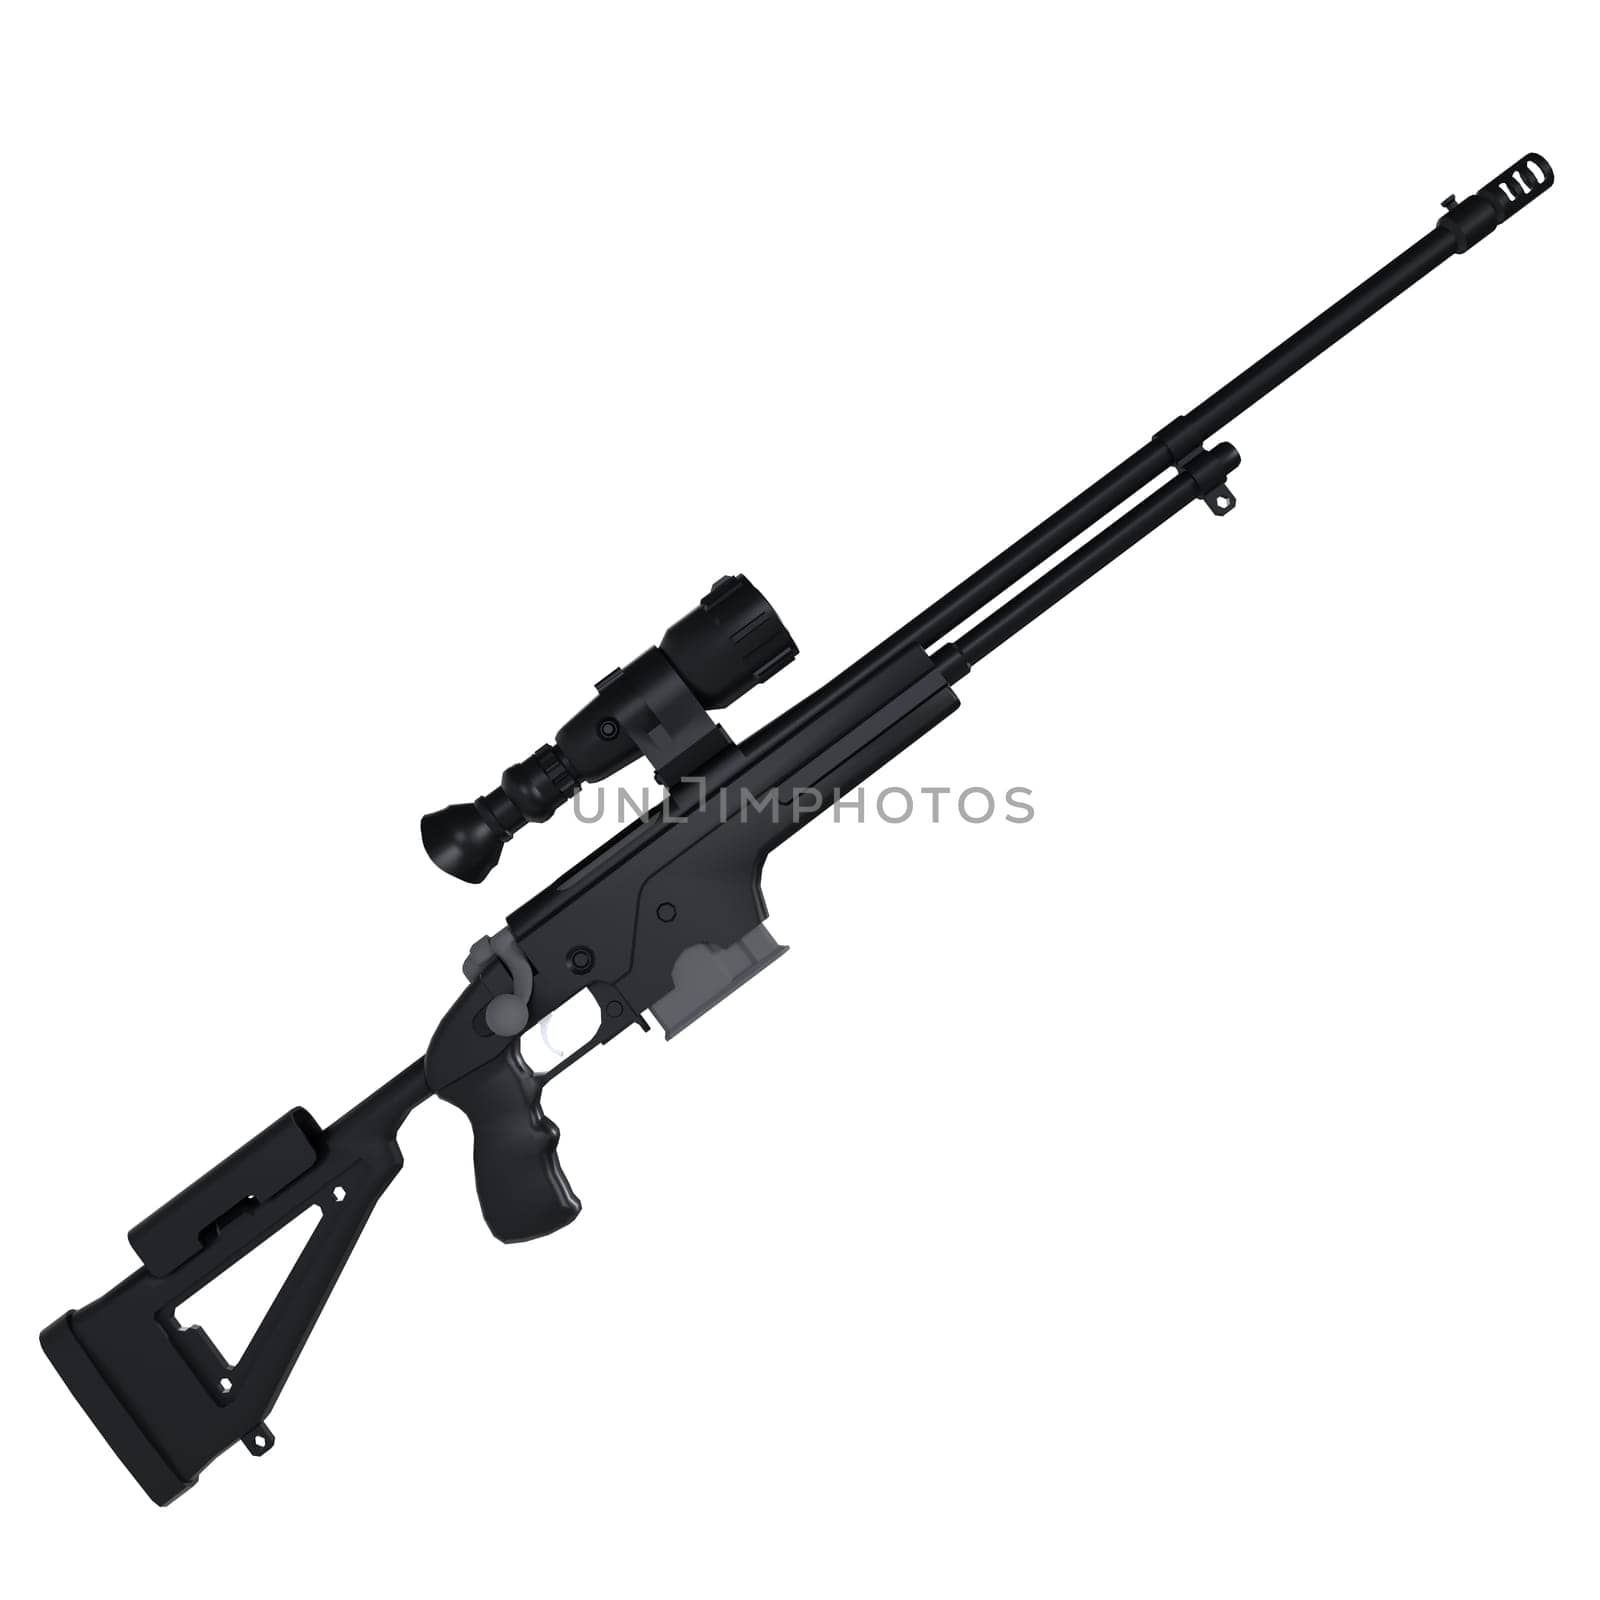 Sniper Rifle isolated on white background. High quality 3d illustration